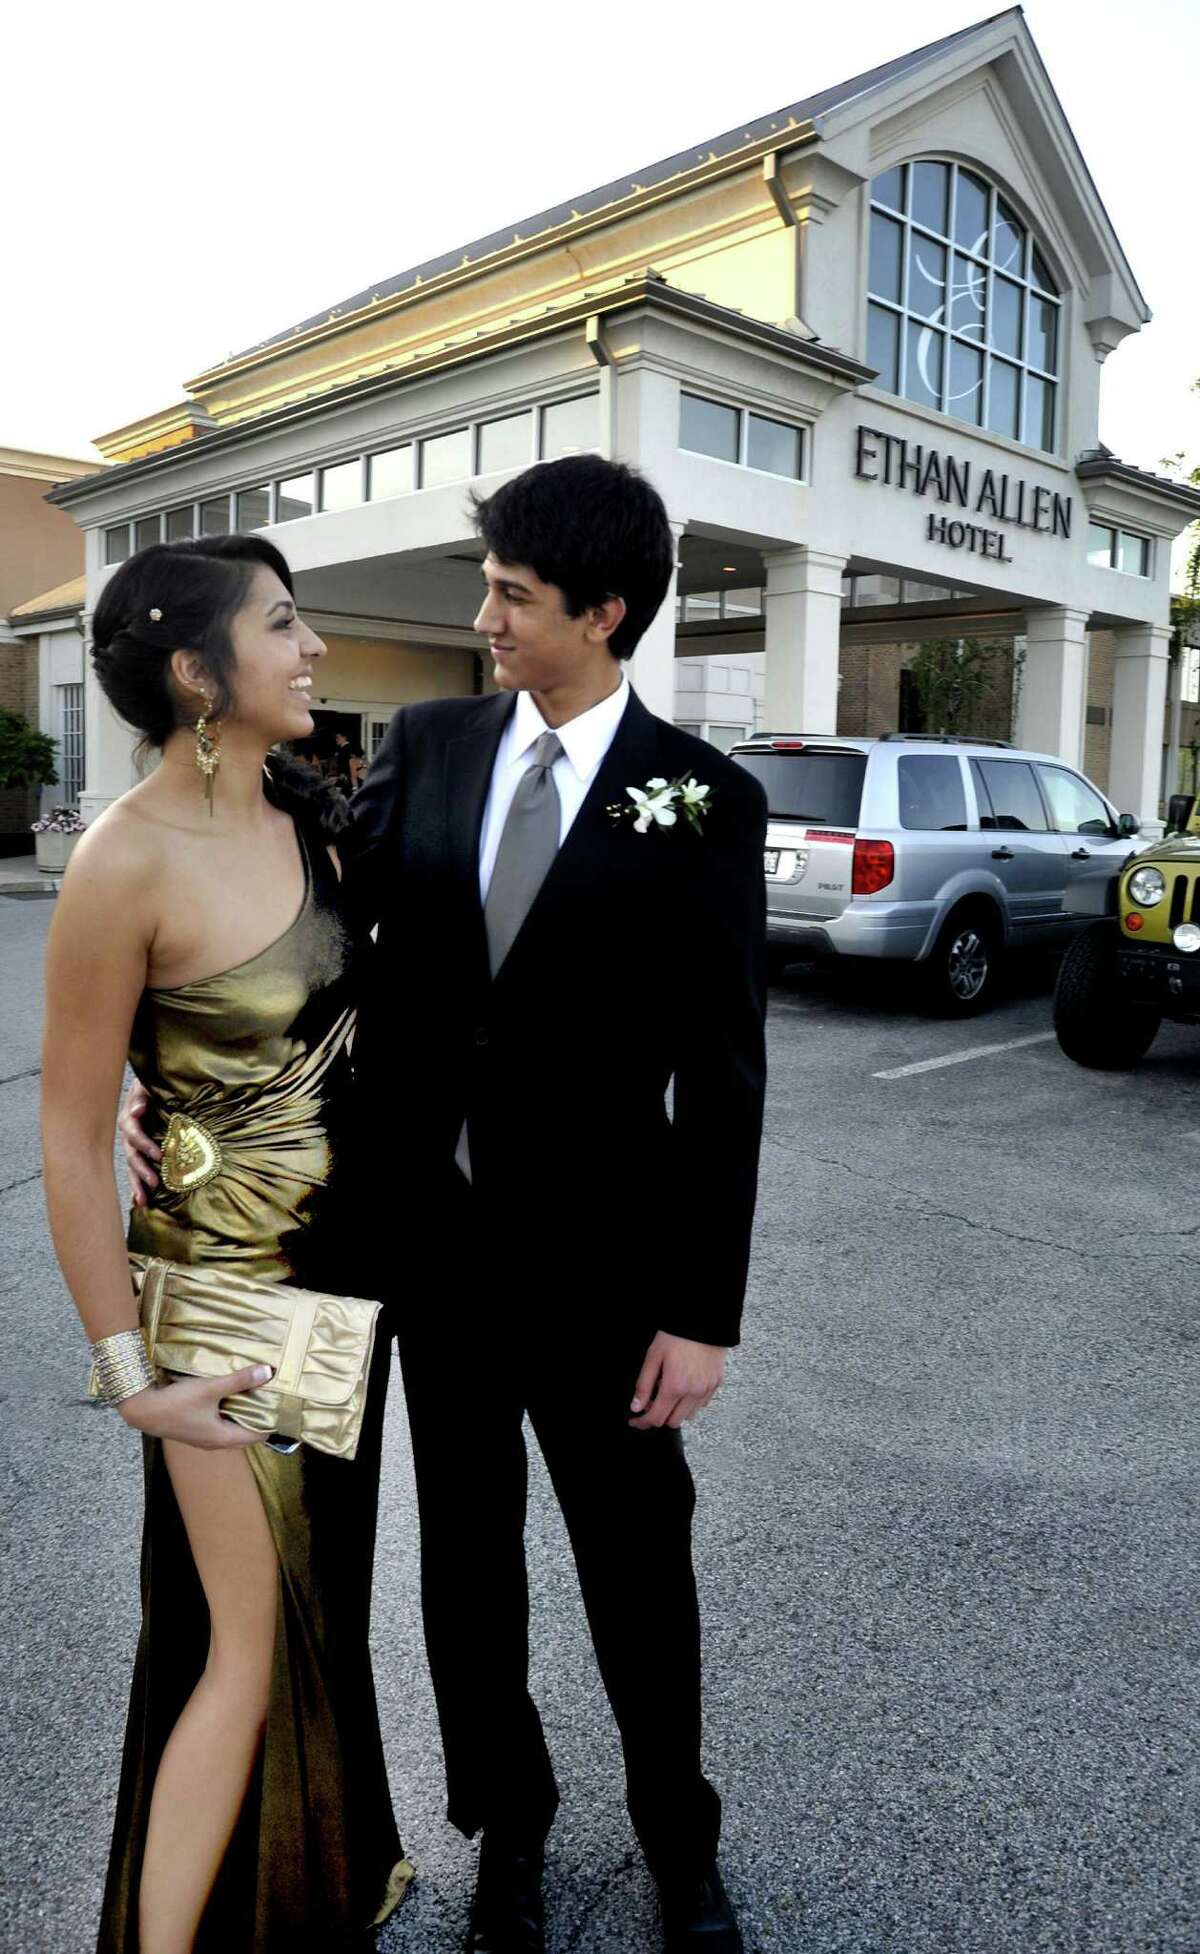 Monica Talwar and Nikhil Wahi attend the Brookfield High School Senior Prom at the Ethan Allen Hotel in Danbury Friday, May 18, 2012.